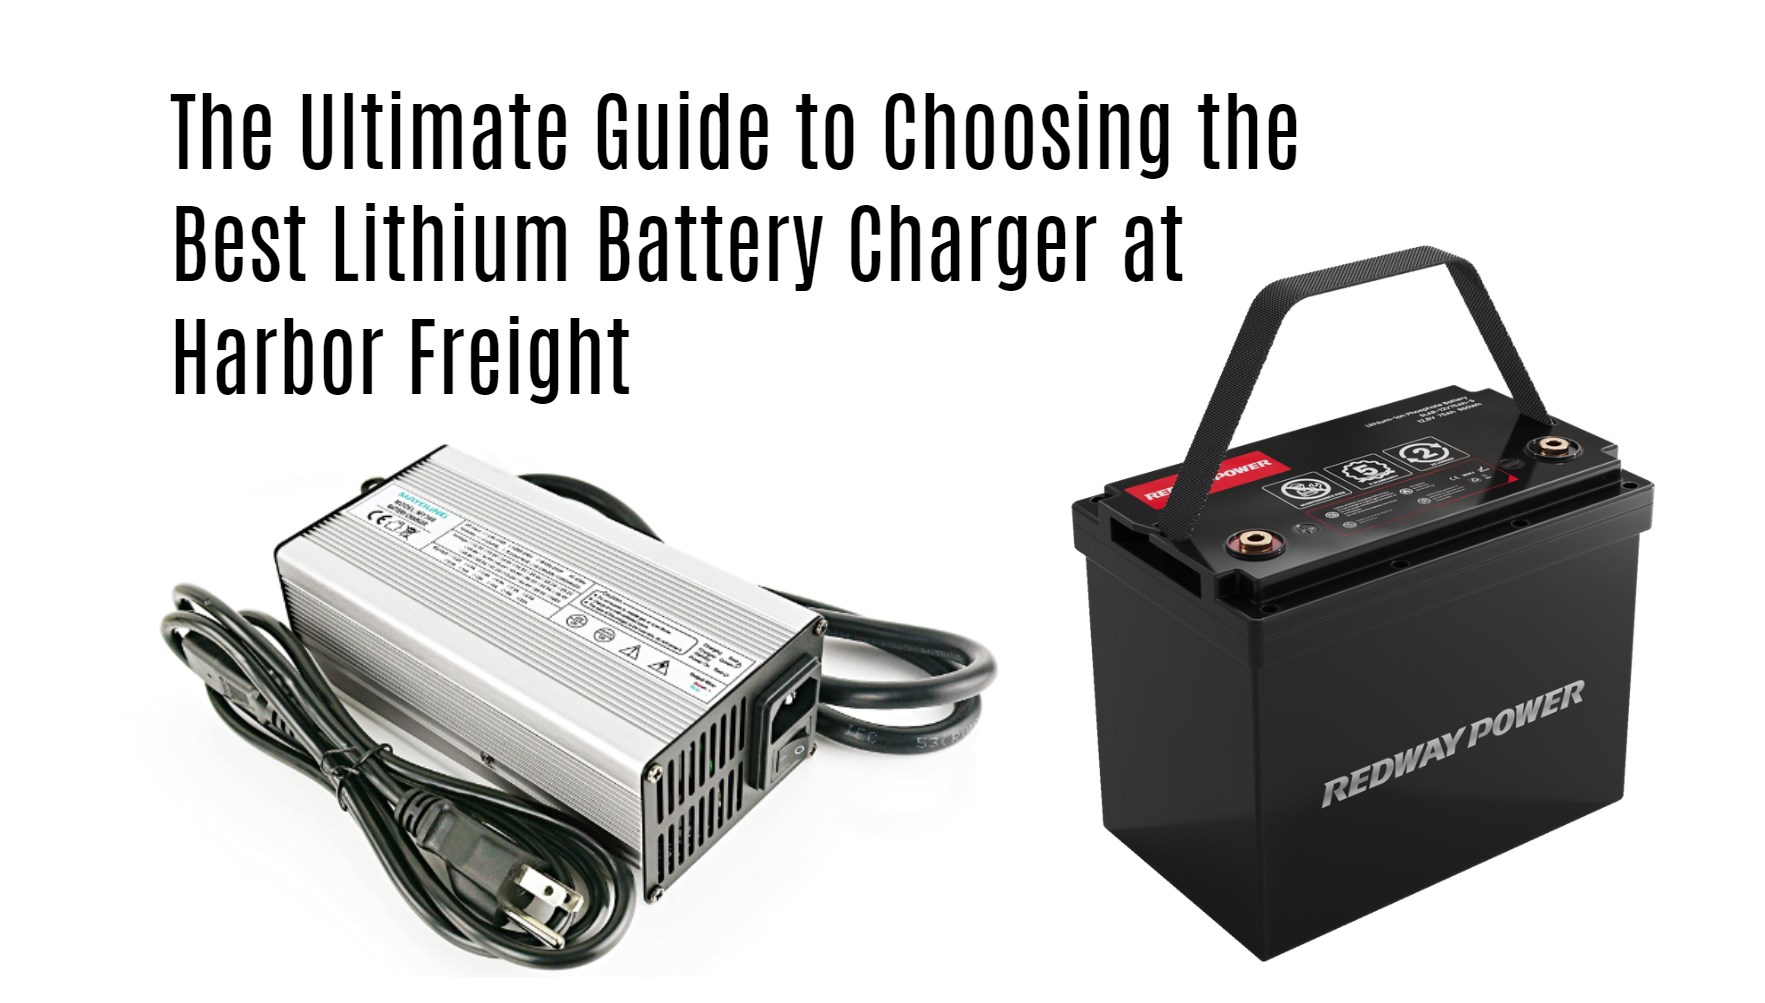 The Ultimate Guide to Choosing the Best Lithium Battery Charger at Harbor Freight